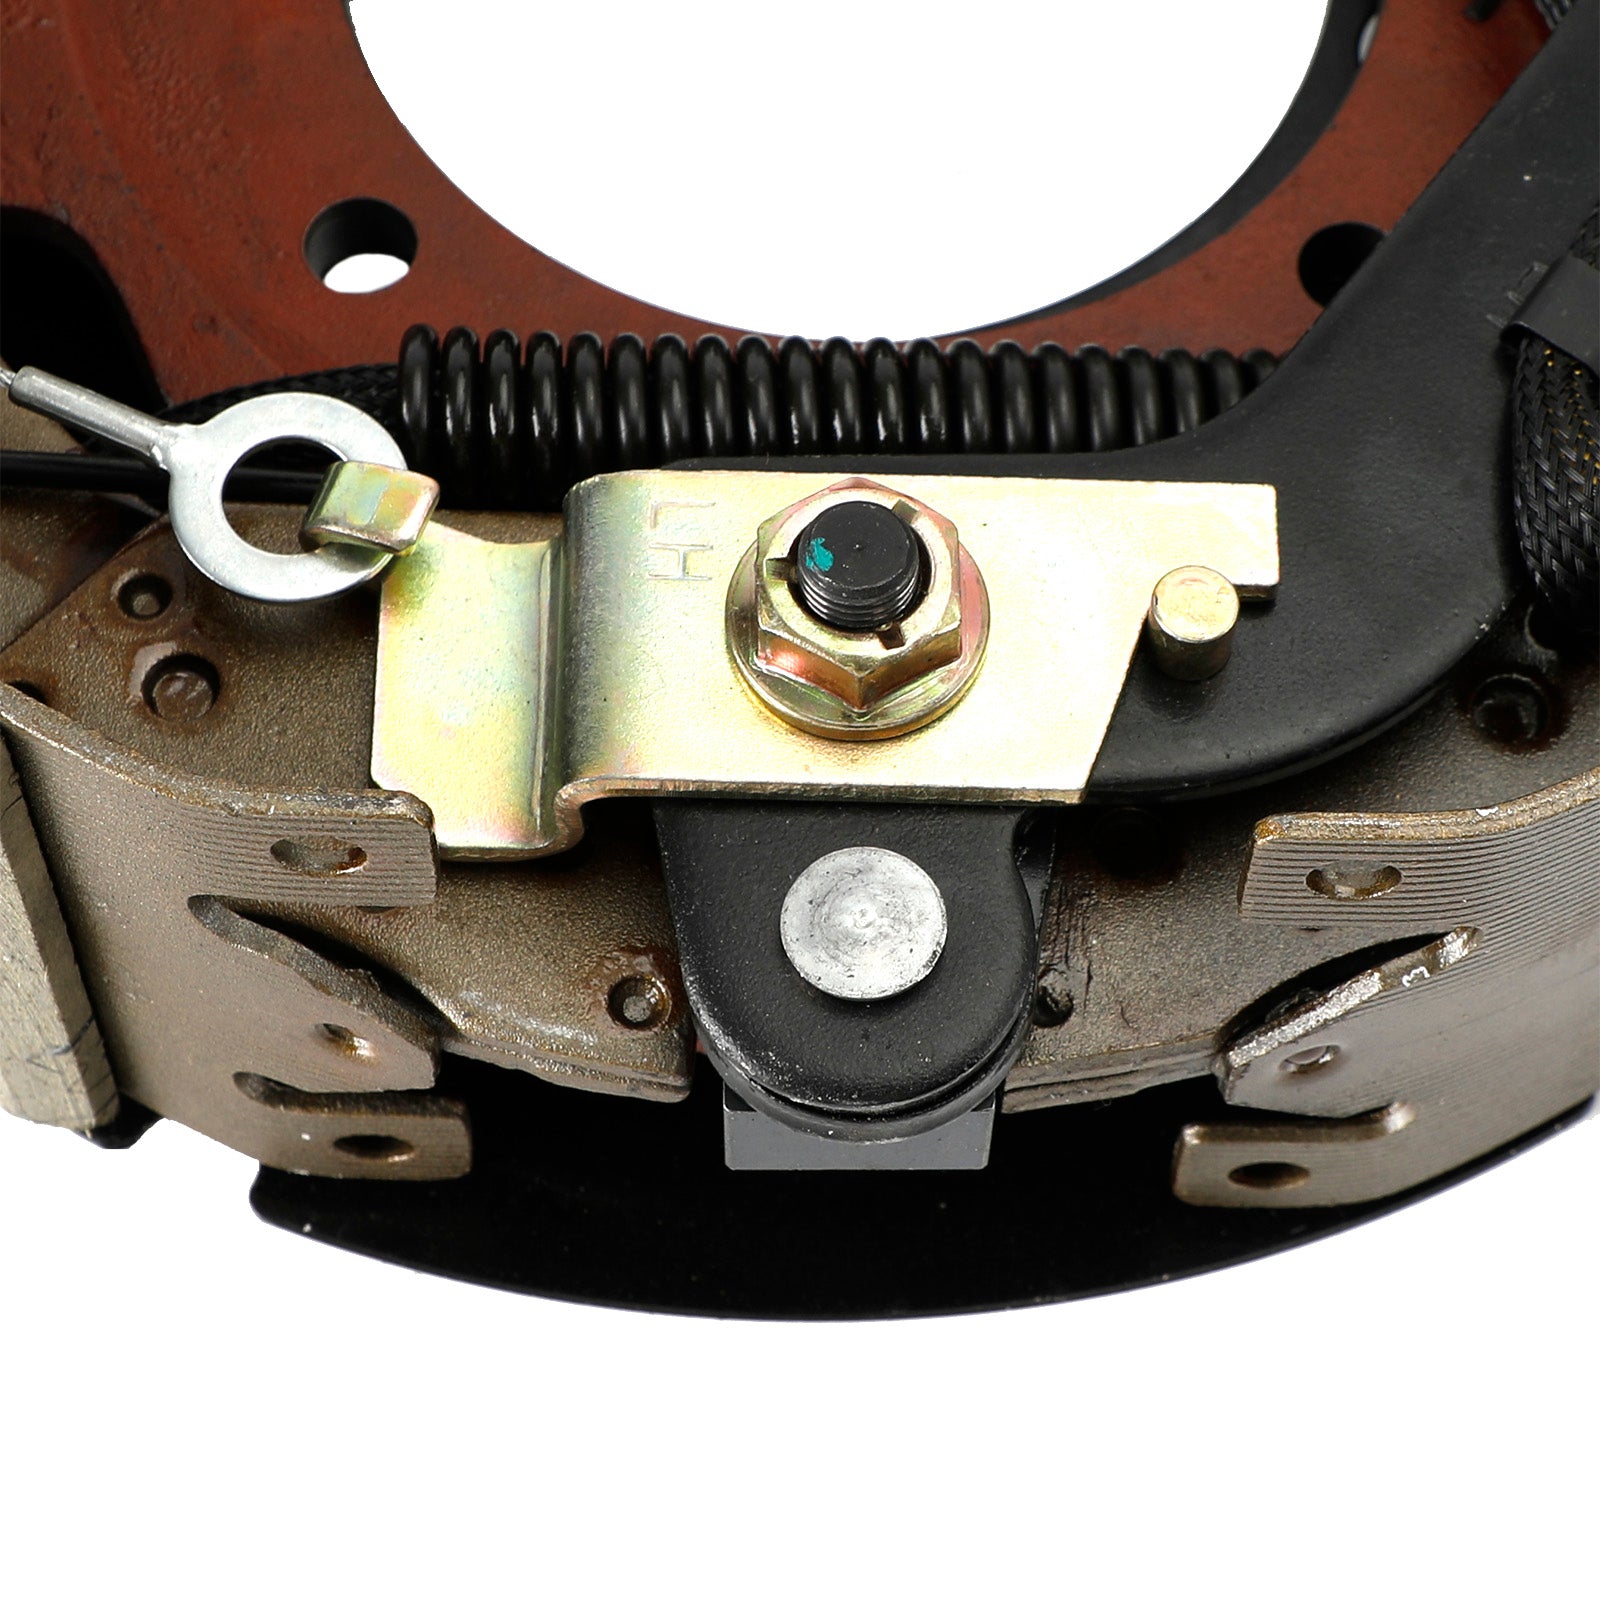 Self-Adjusting 12-1/4" Electric Trailer Brake Kit with Shields - Left/Right Hand for 10K Capacity